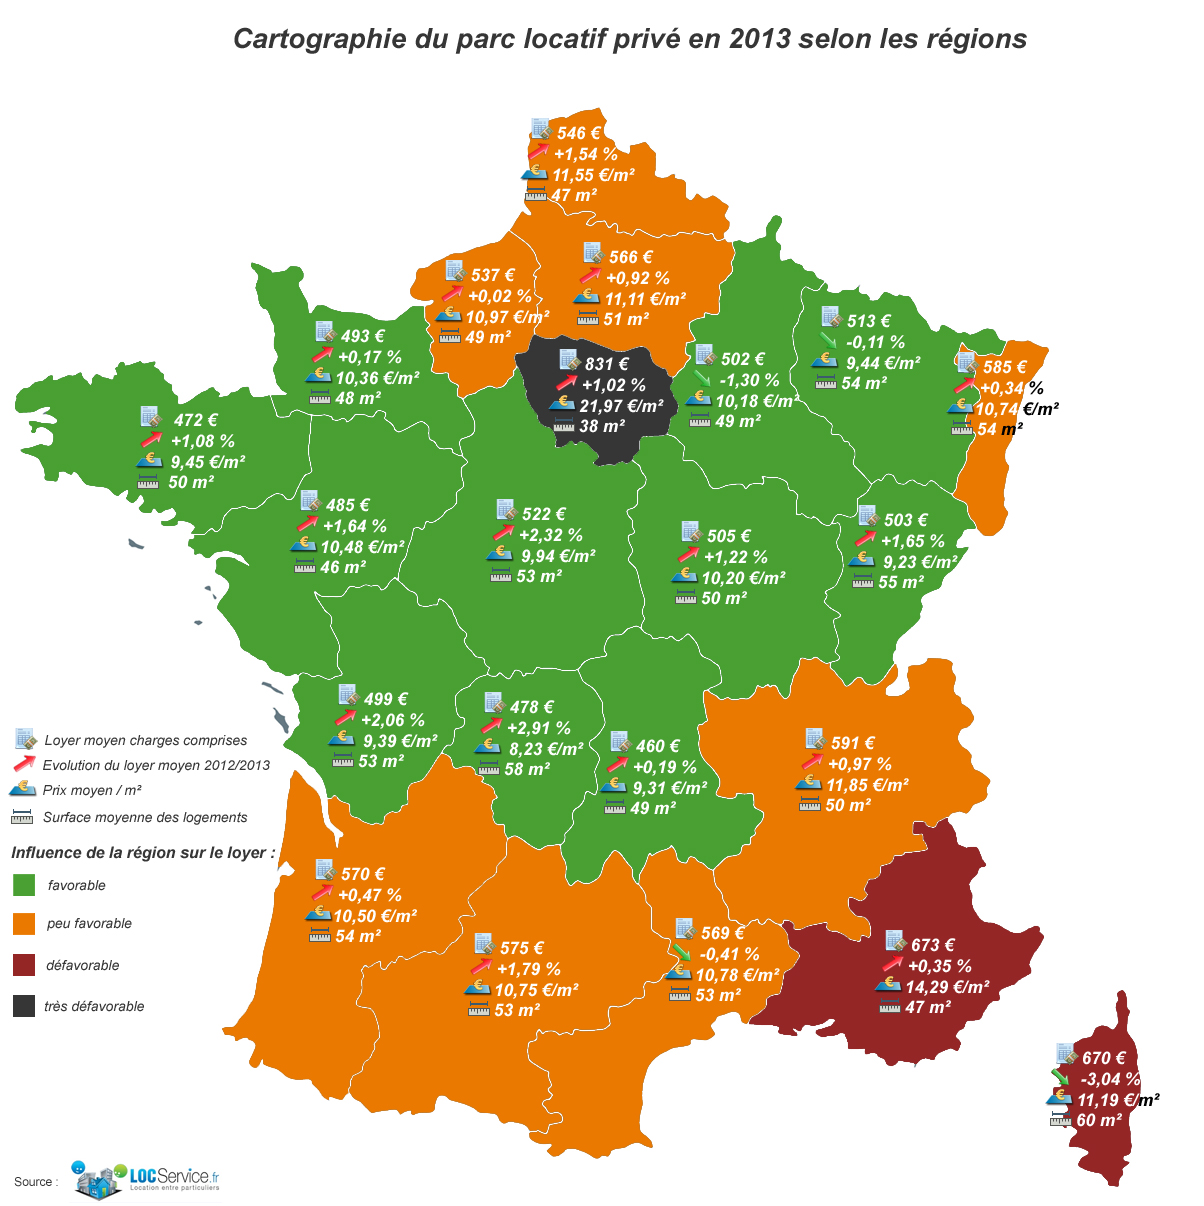 http://blog.locservice.fr/wp-content/uploads/2014/01/r%C3%A9gions.jpg